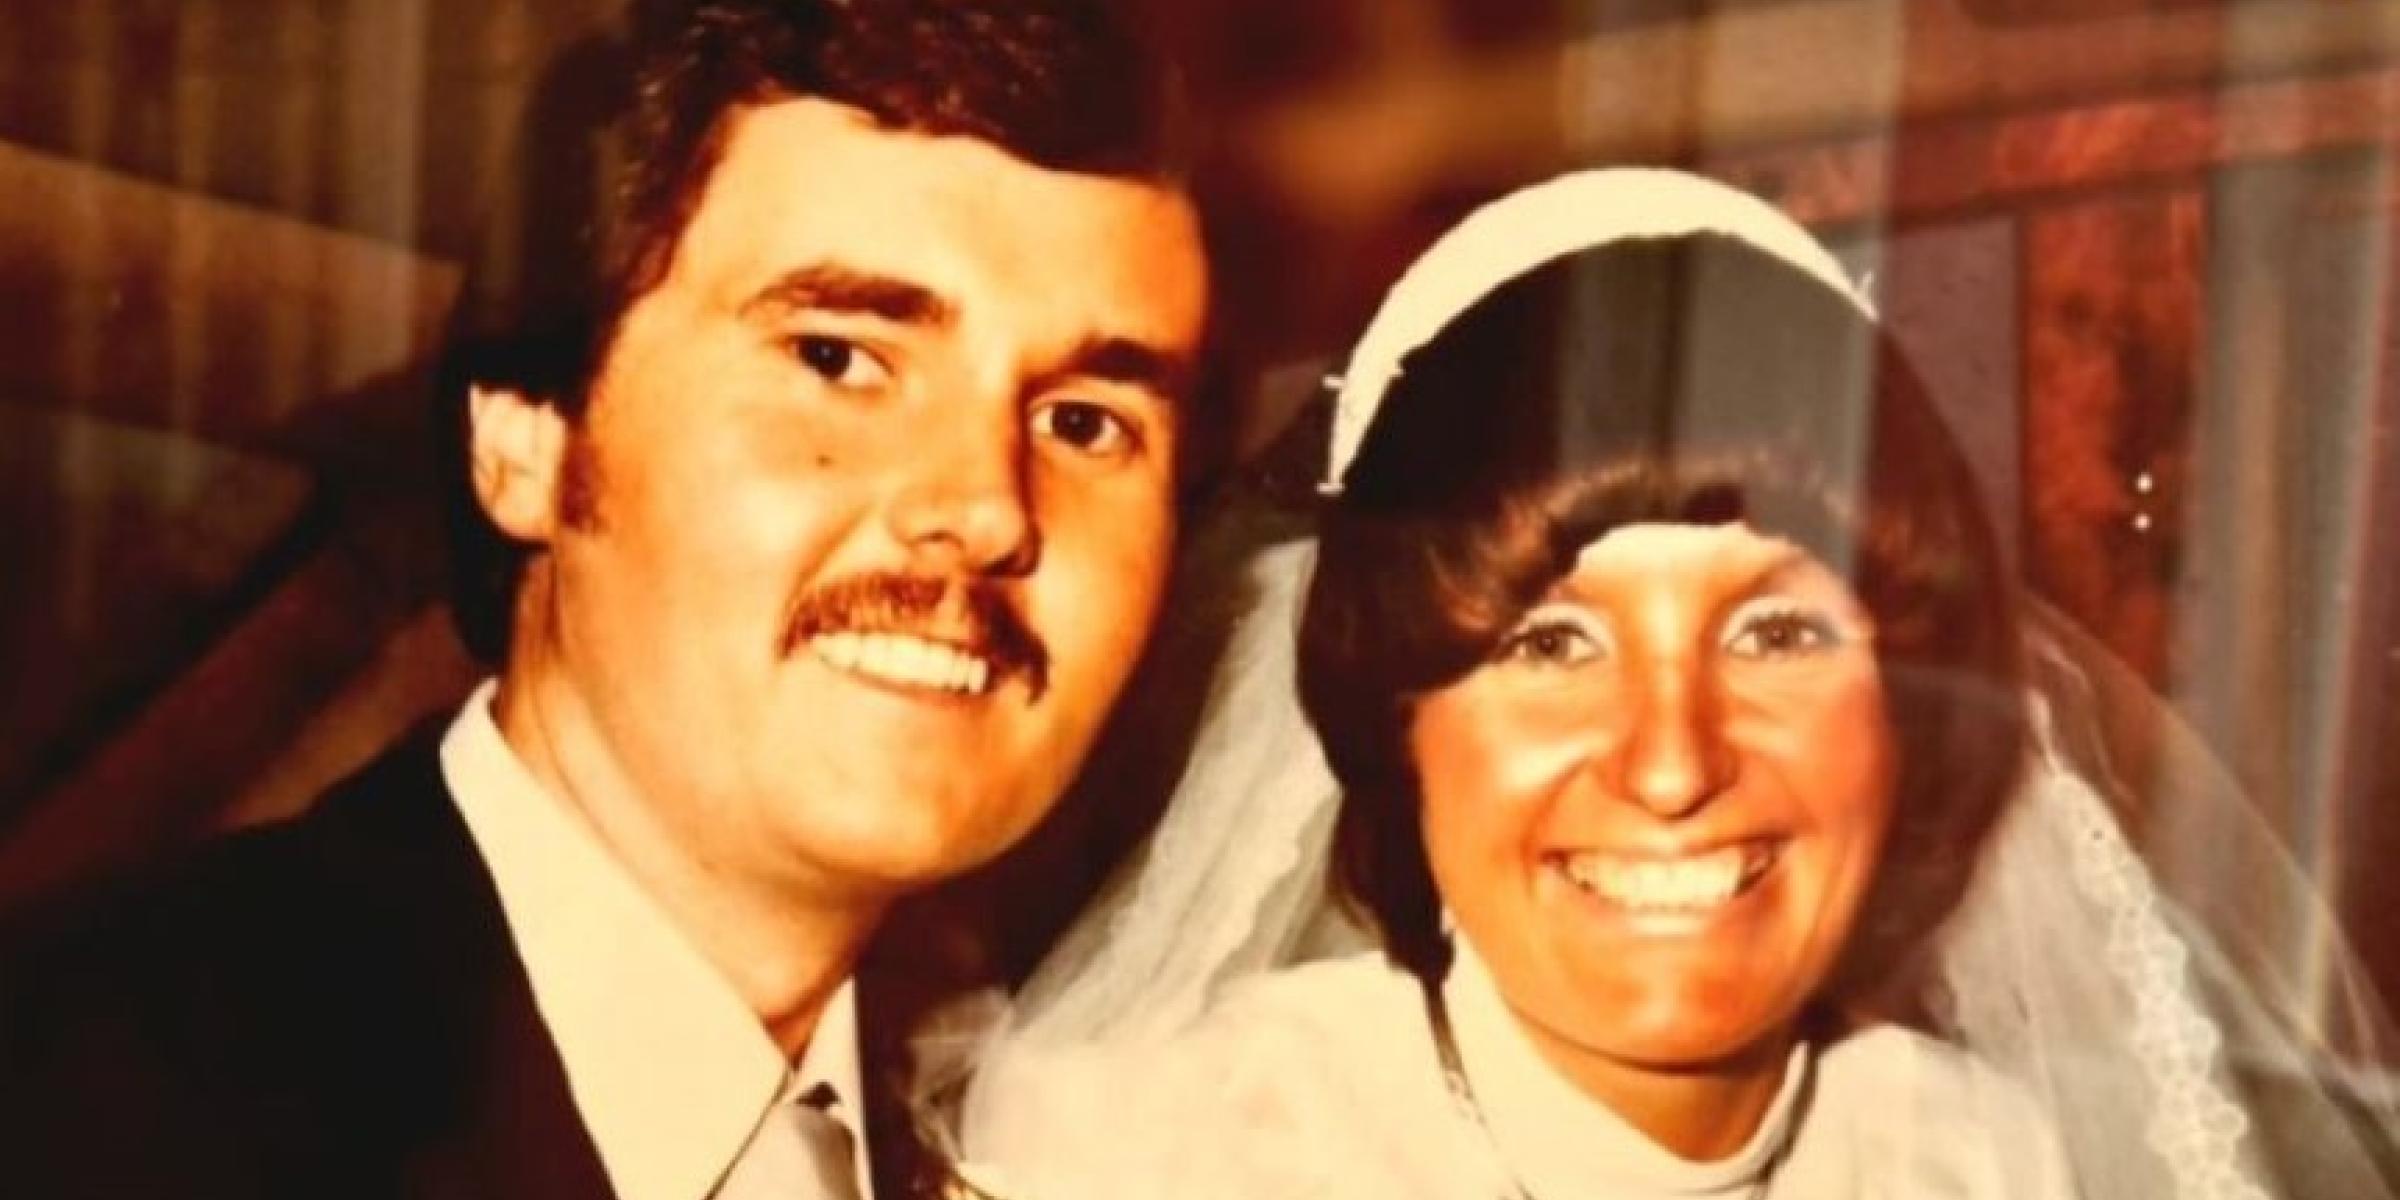 Bill and Jo on their wedding day